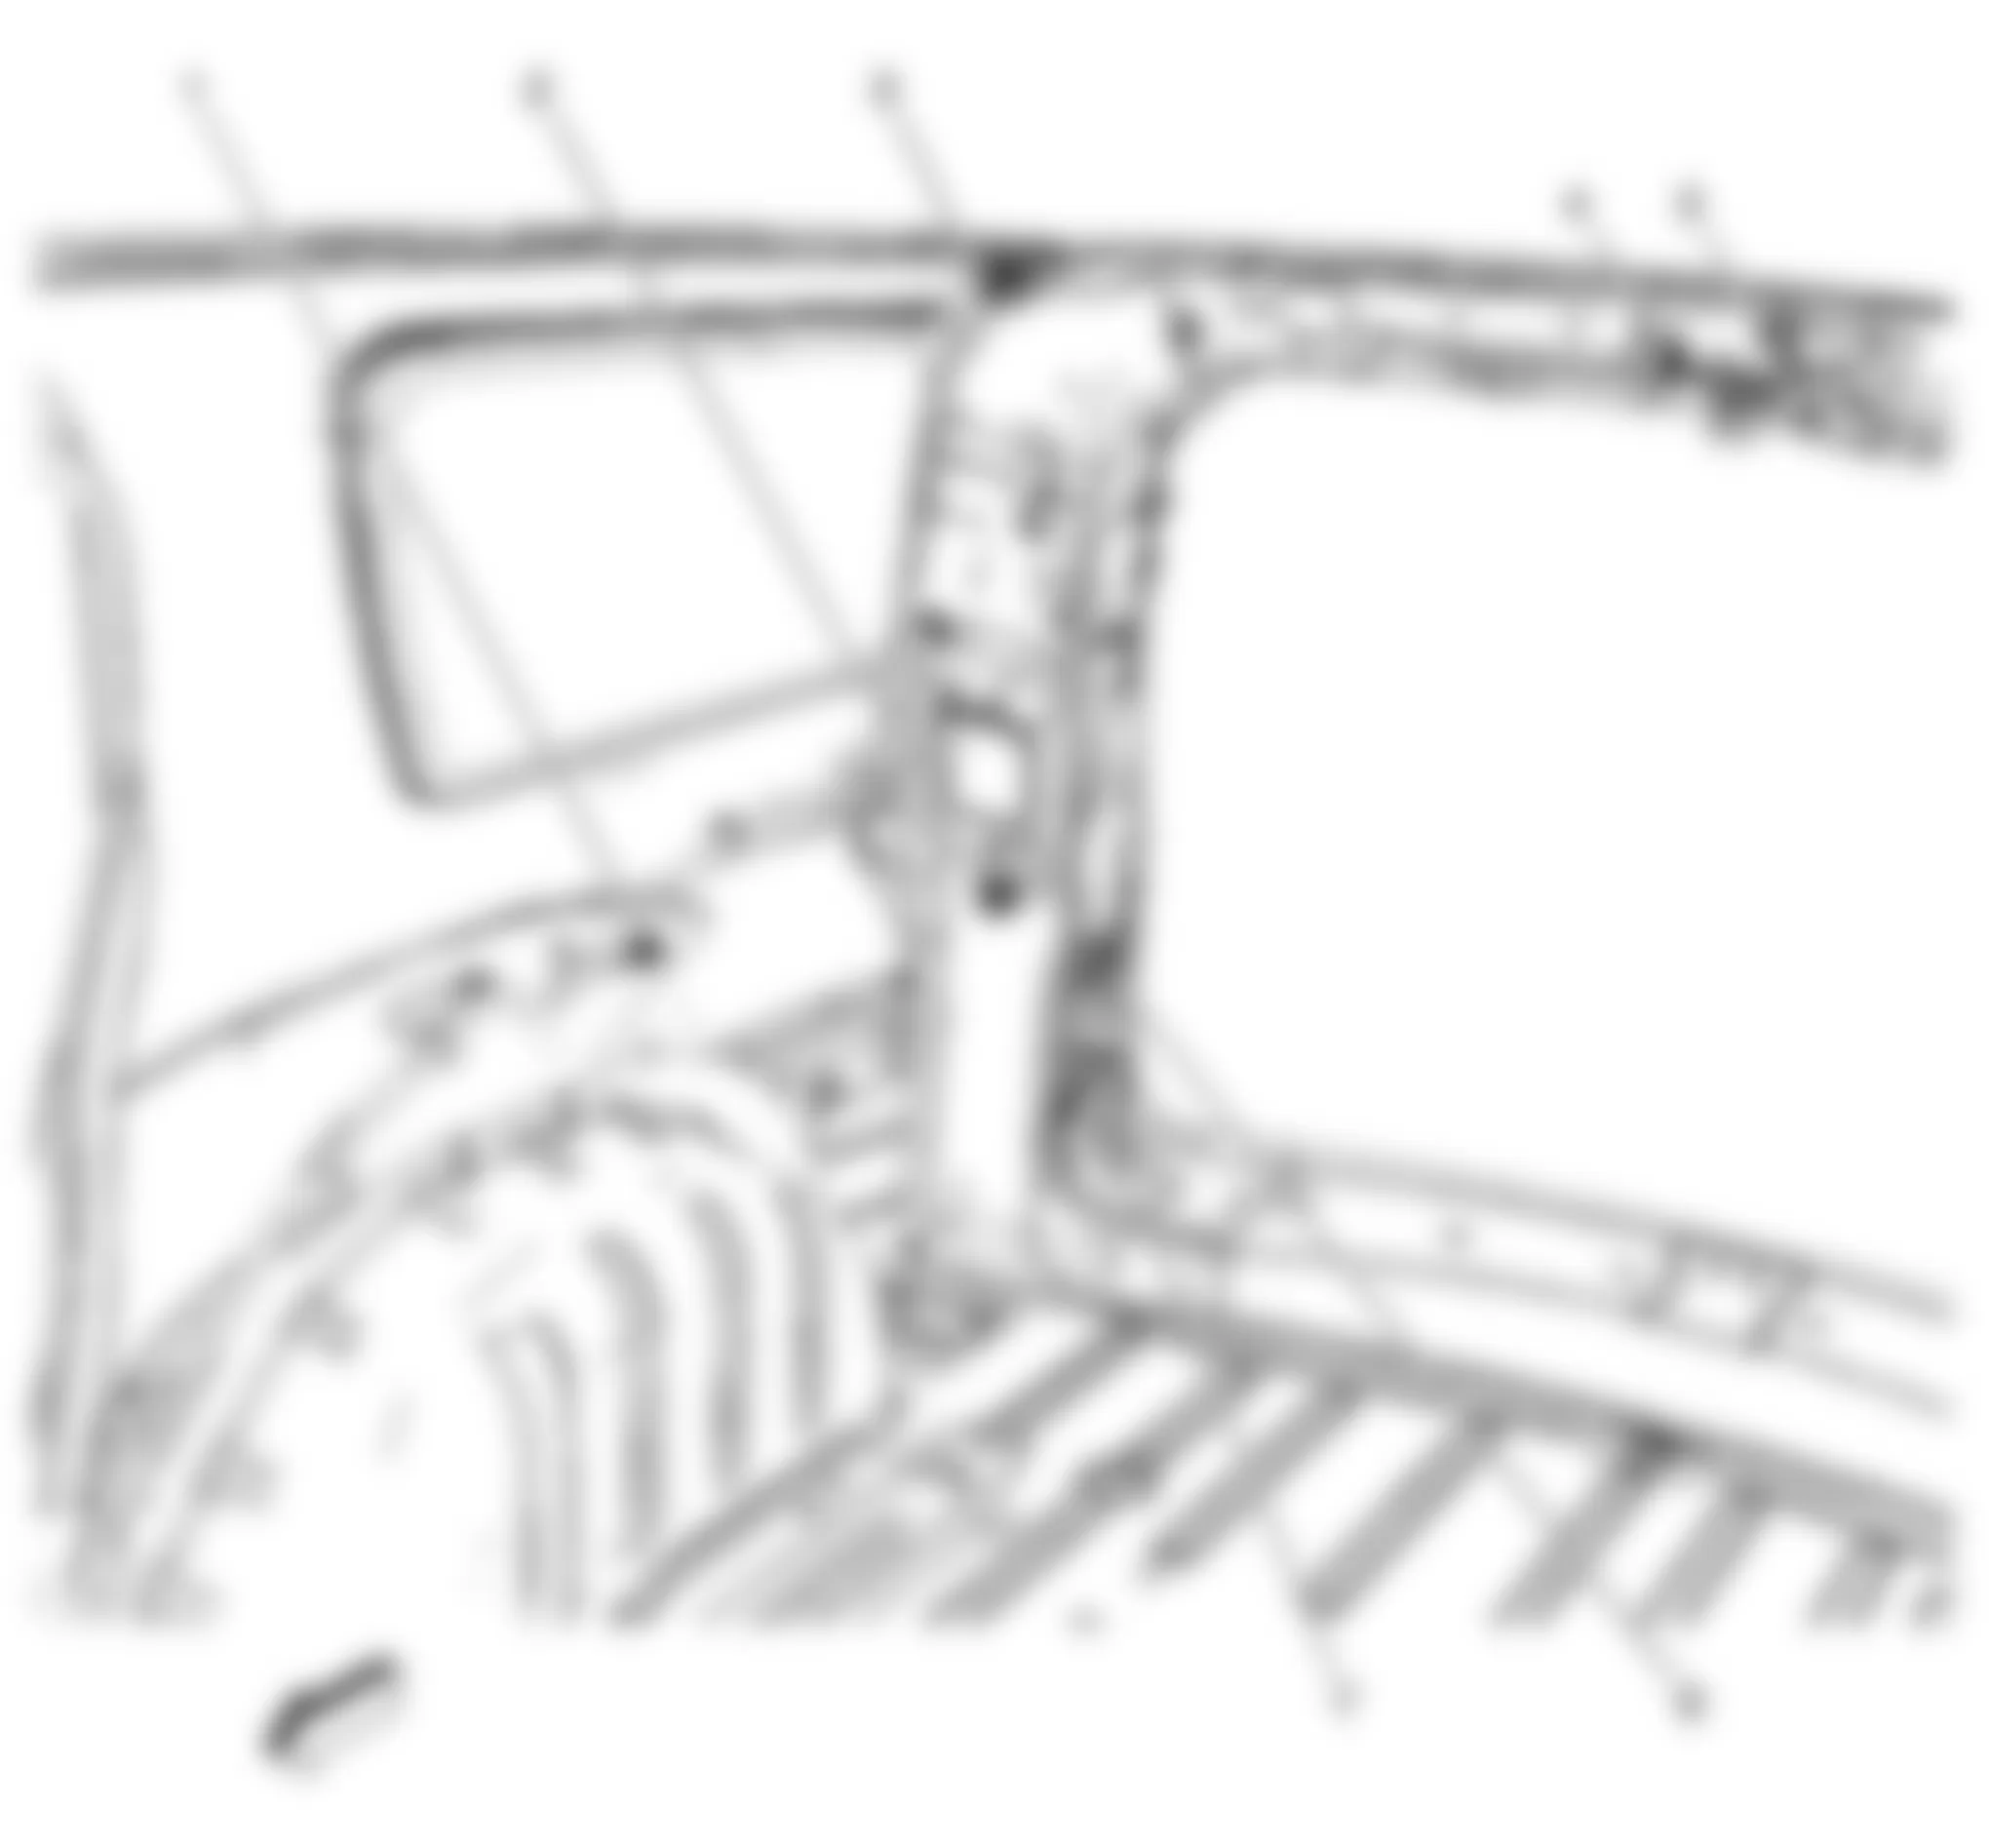 Buick Enclave CXL 2010 - Component Locations -  Right Rear Of Passenger Compartment